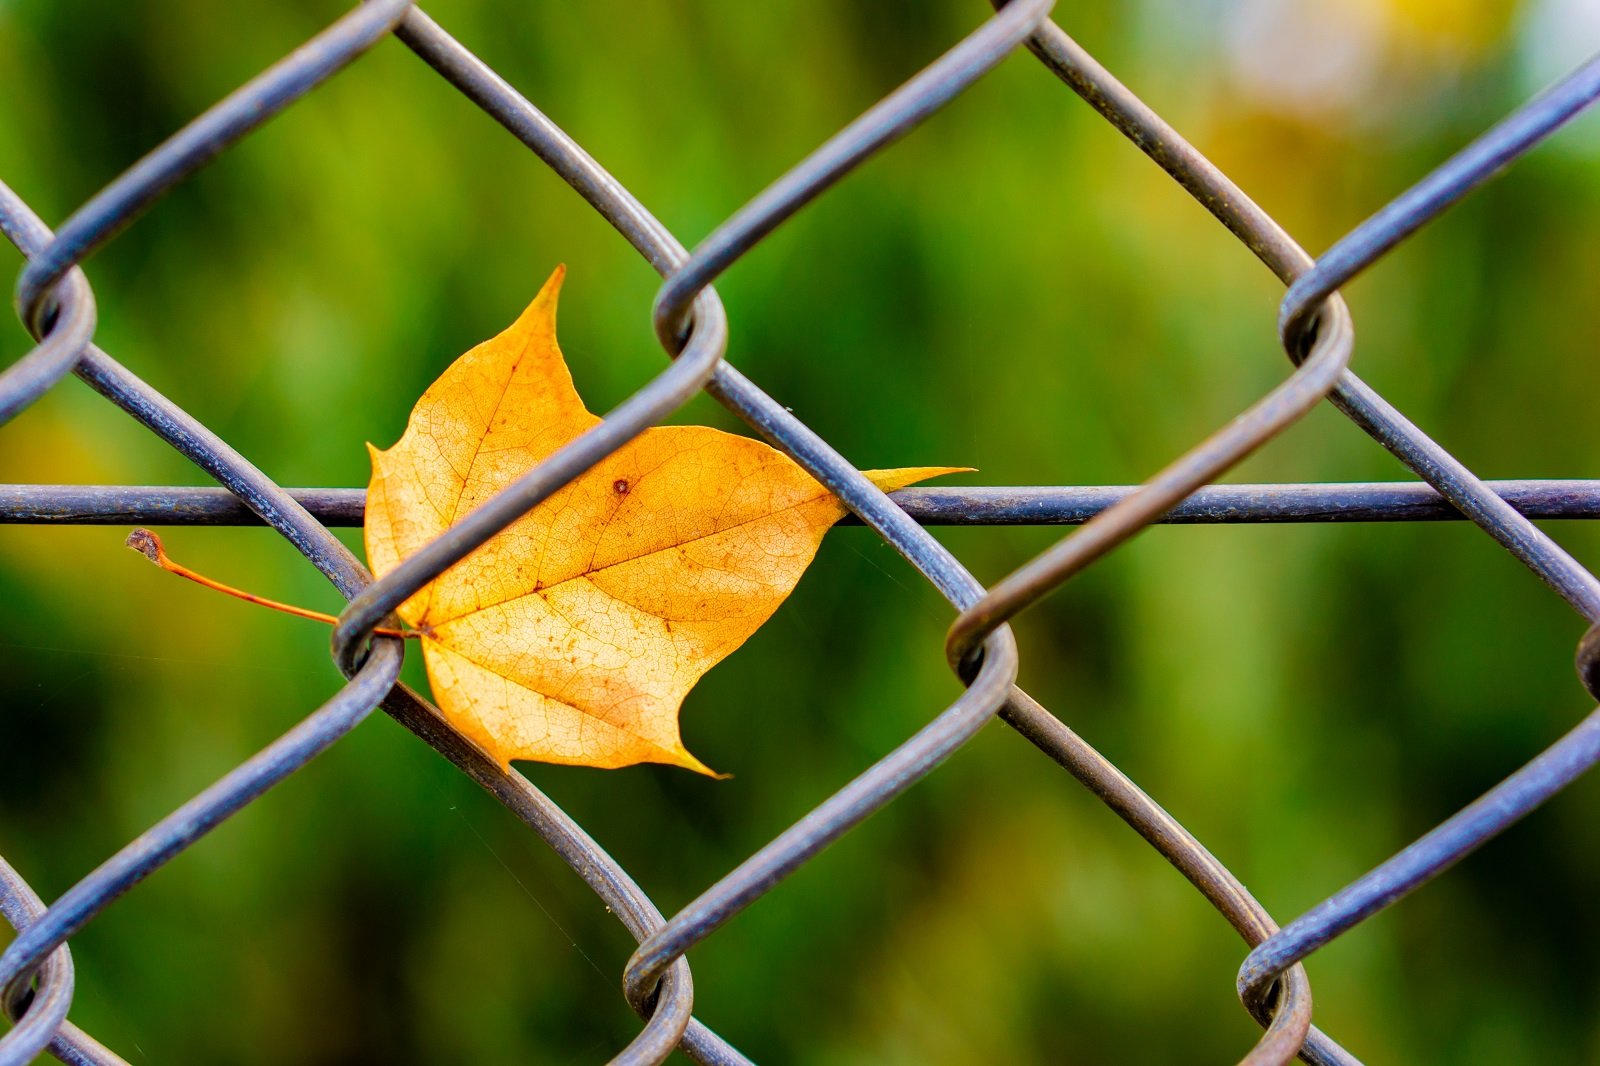 mesmerizing-view-of-a-yellow-leaf-stuck-on-a-metal-fence-in-the-park